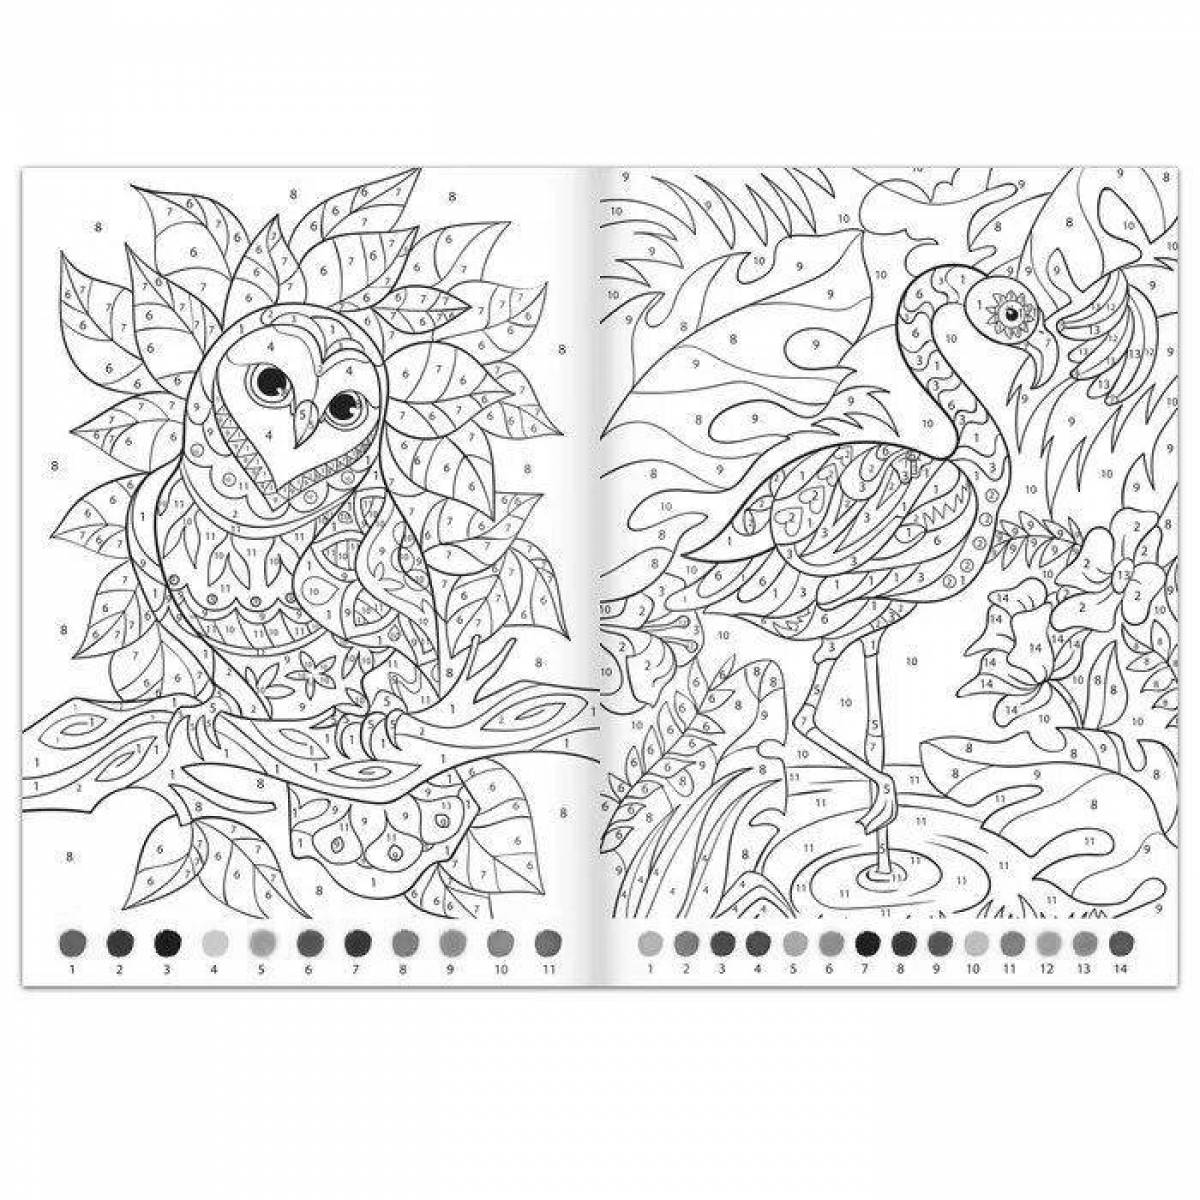 Joyful beauty coloring by numbers